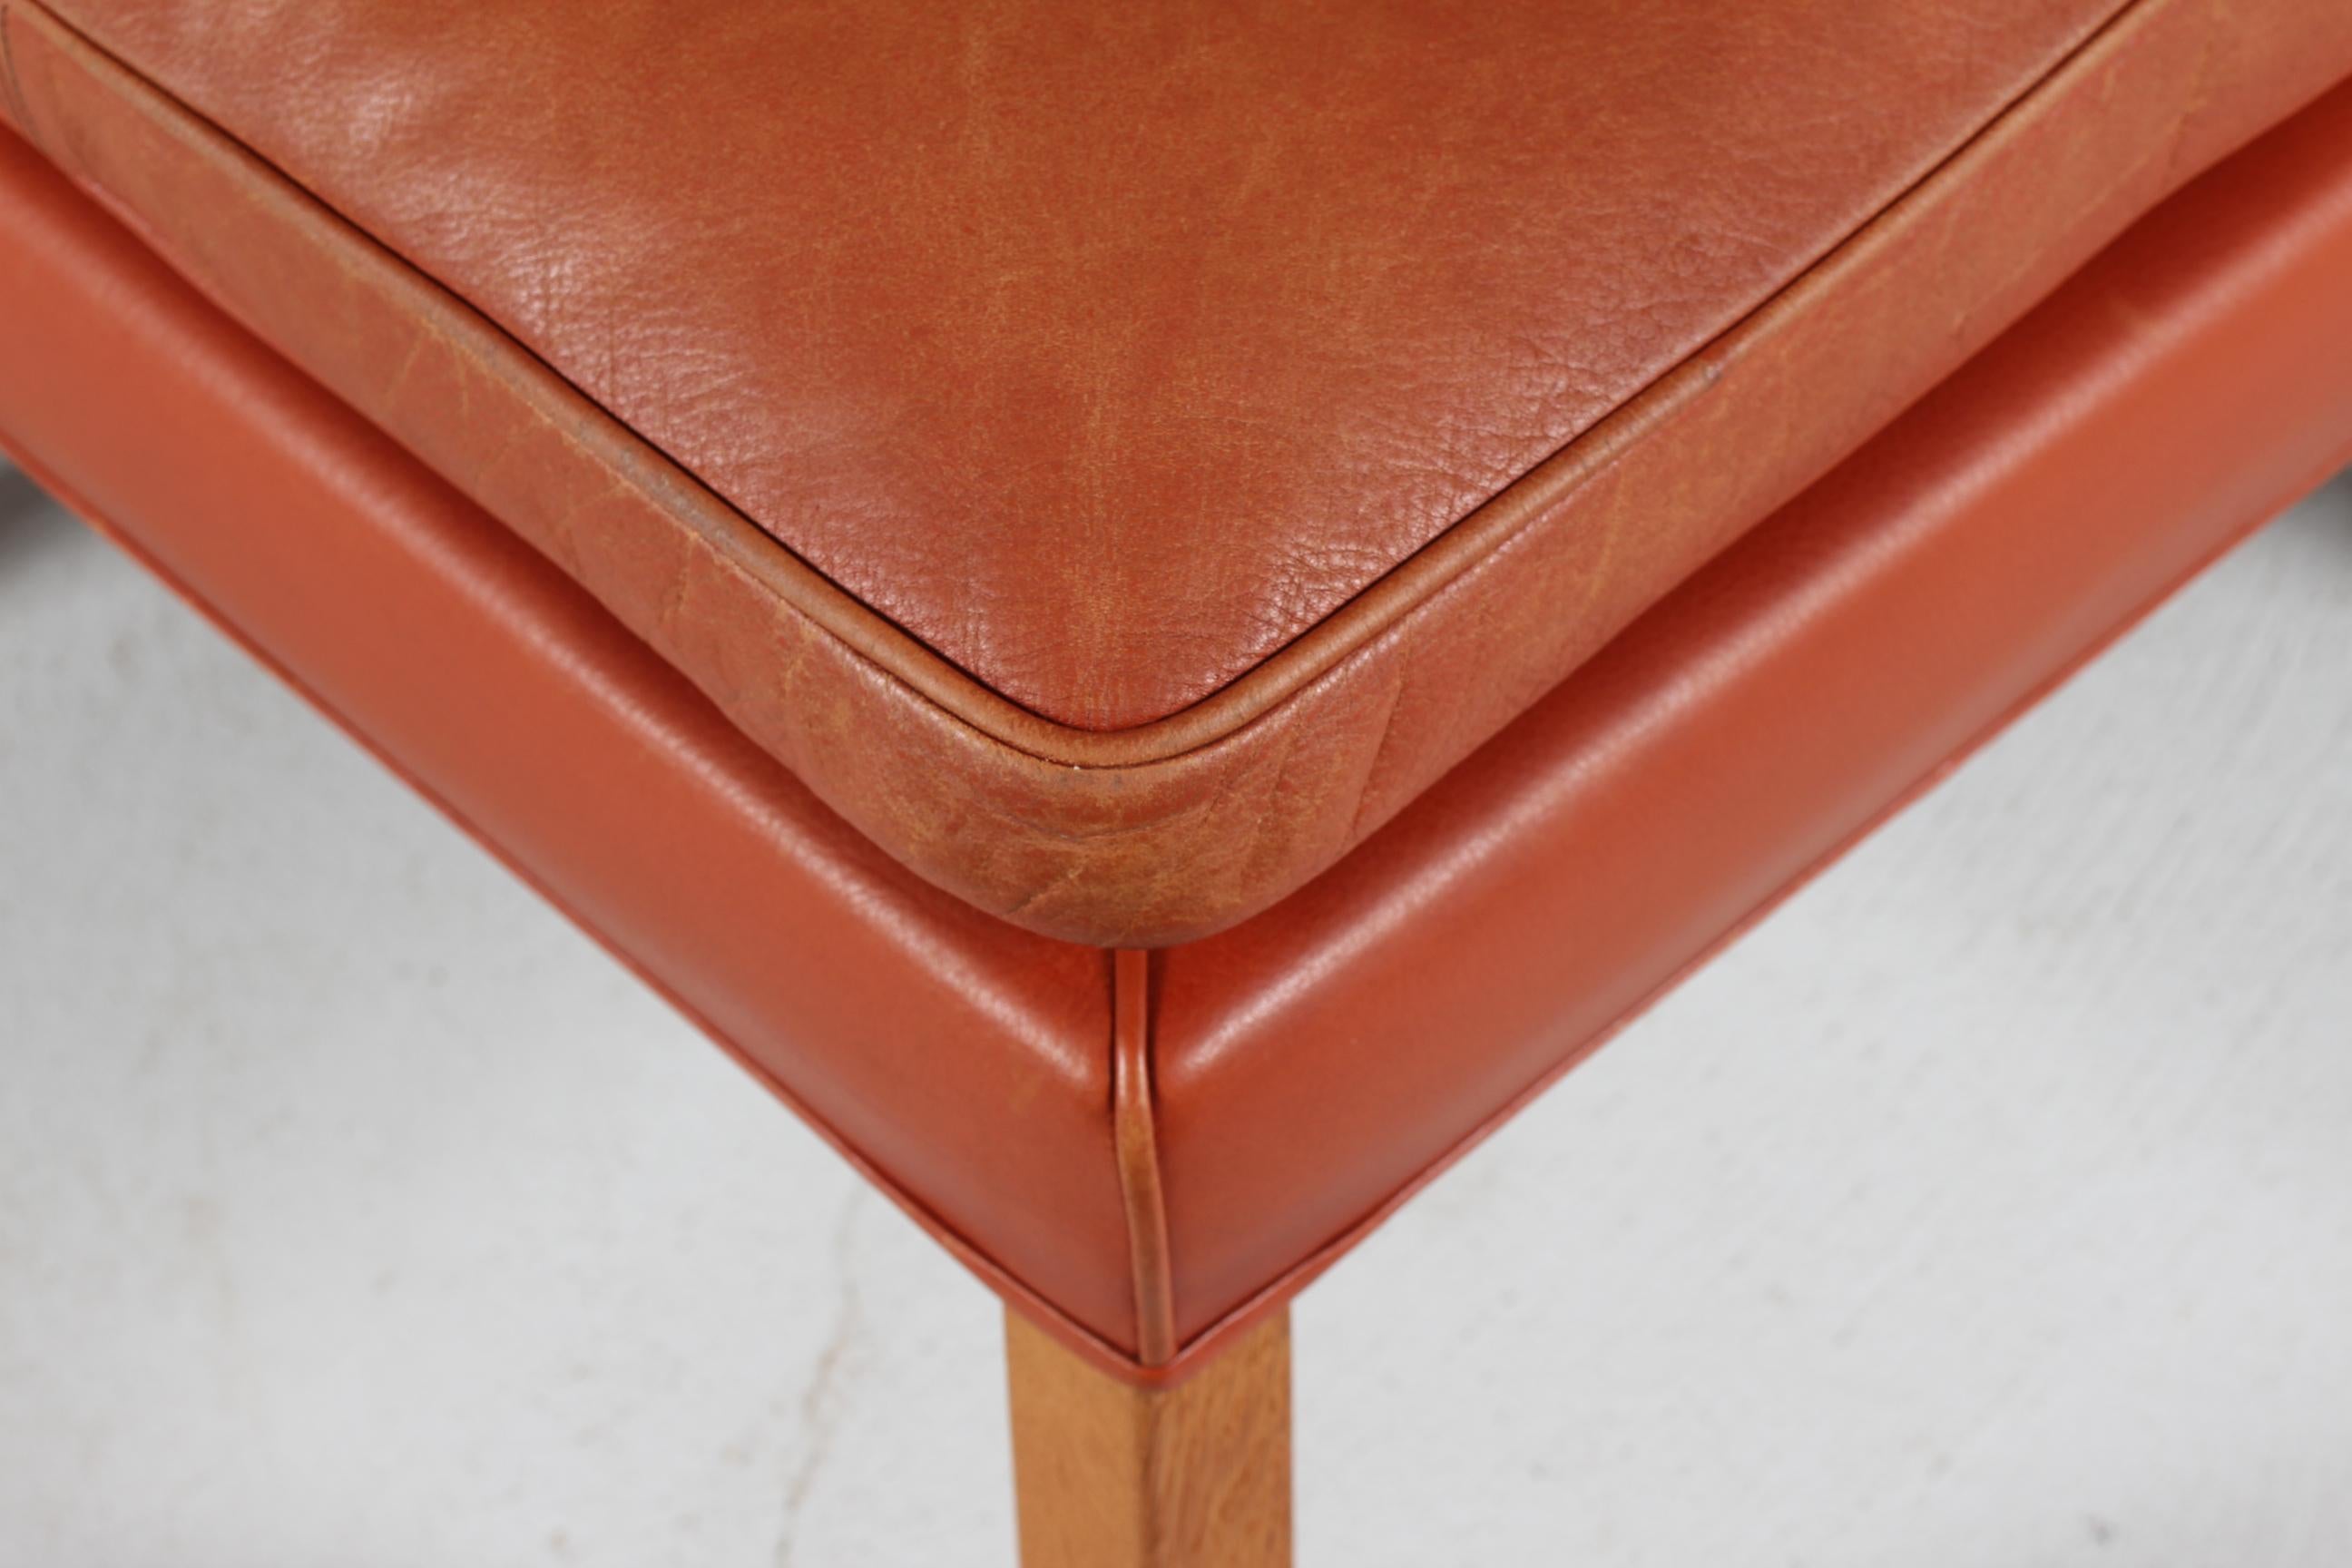 Mid-Century Modern Børge Mogensen Stool 2202 Cognac Colored Leather and Oak by Fredericia Furniture